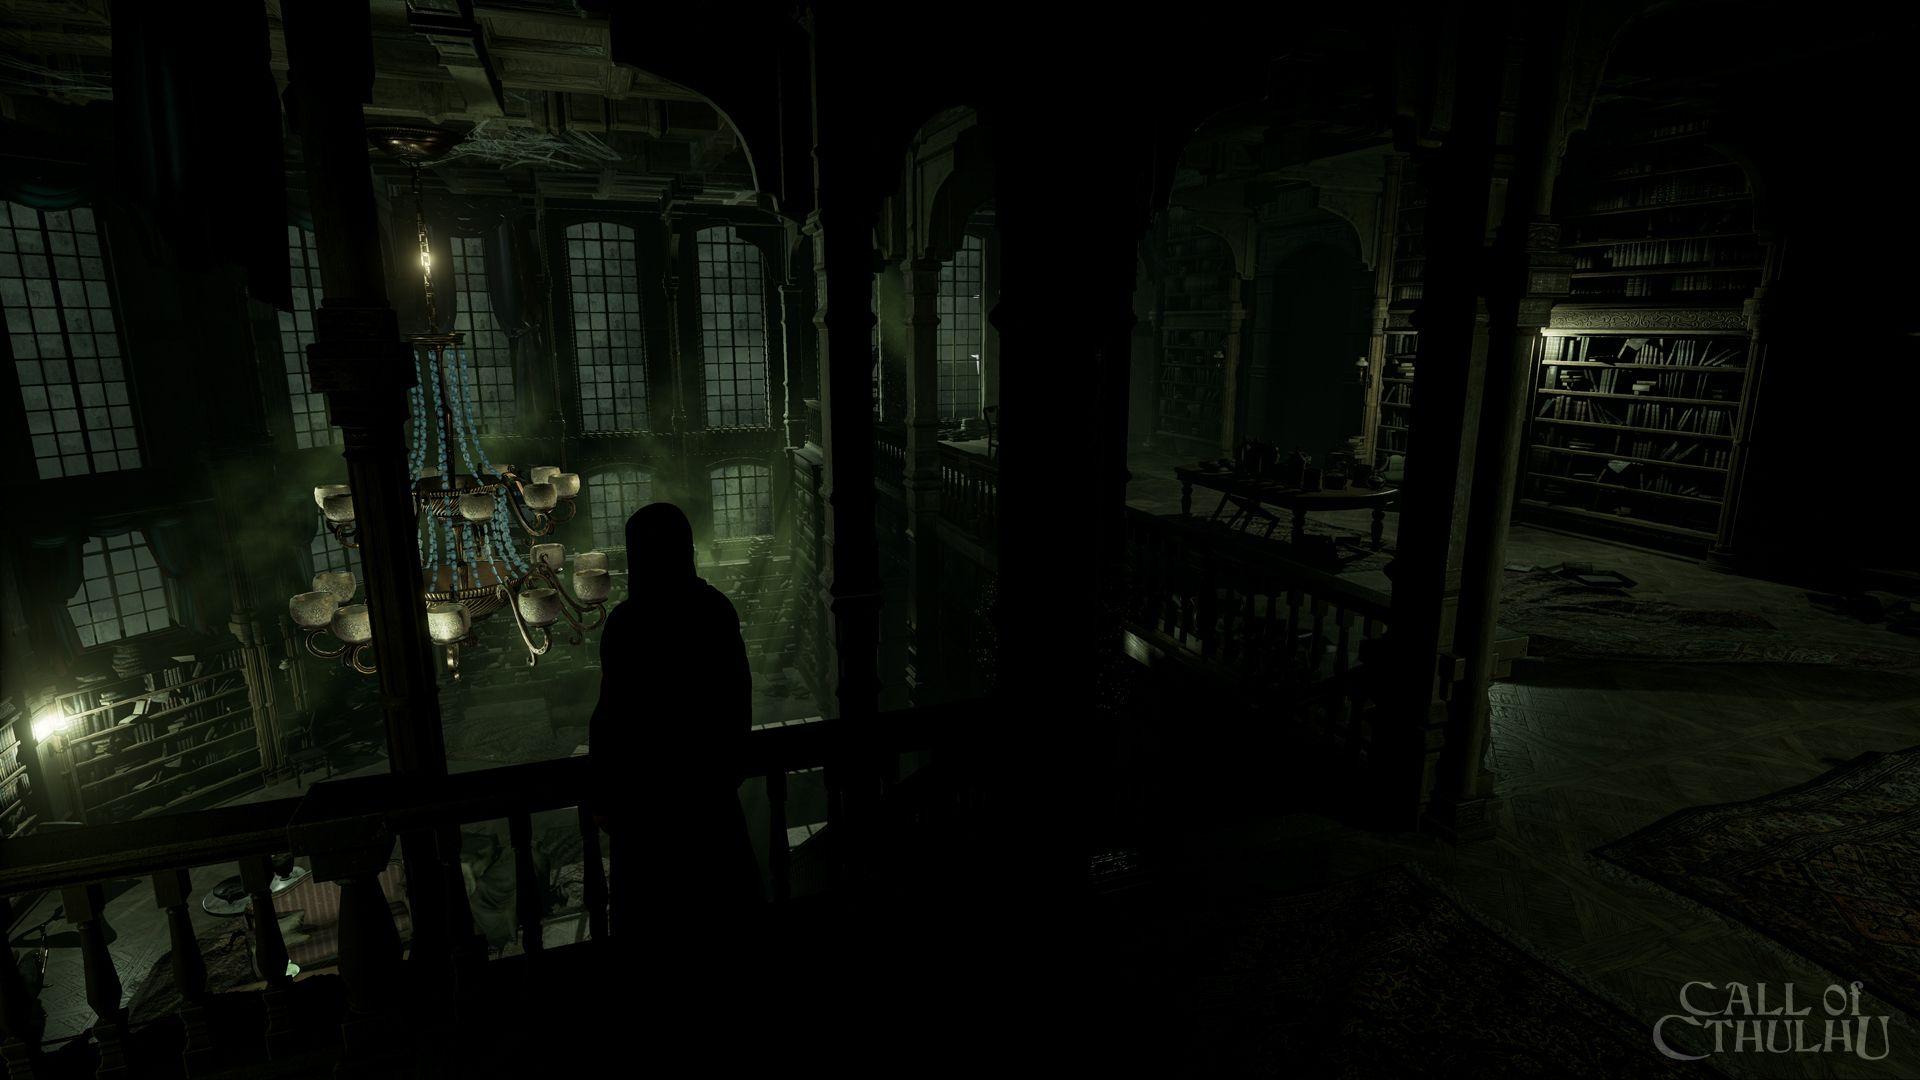 EXCLUSIVE new image from the upcoming “Call of Cthulhu” videogame